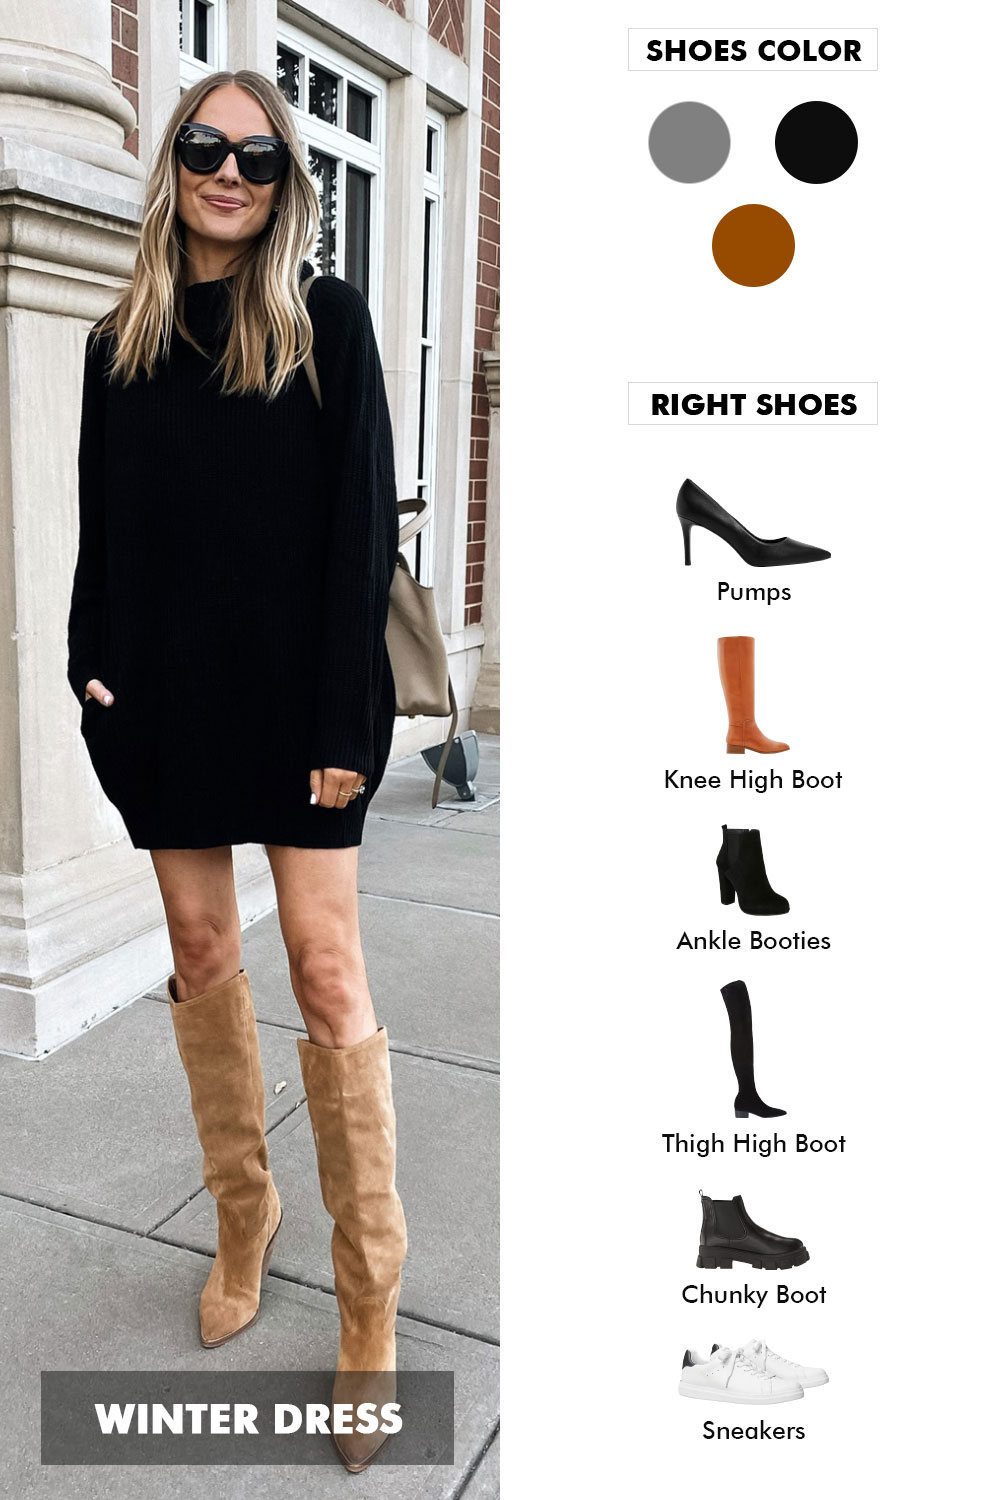 shoes to wear with black dress in winter